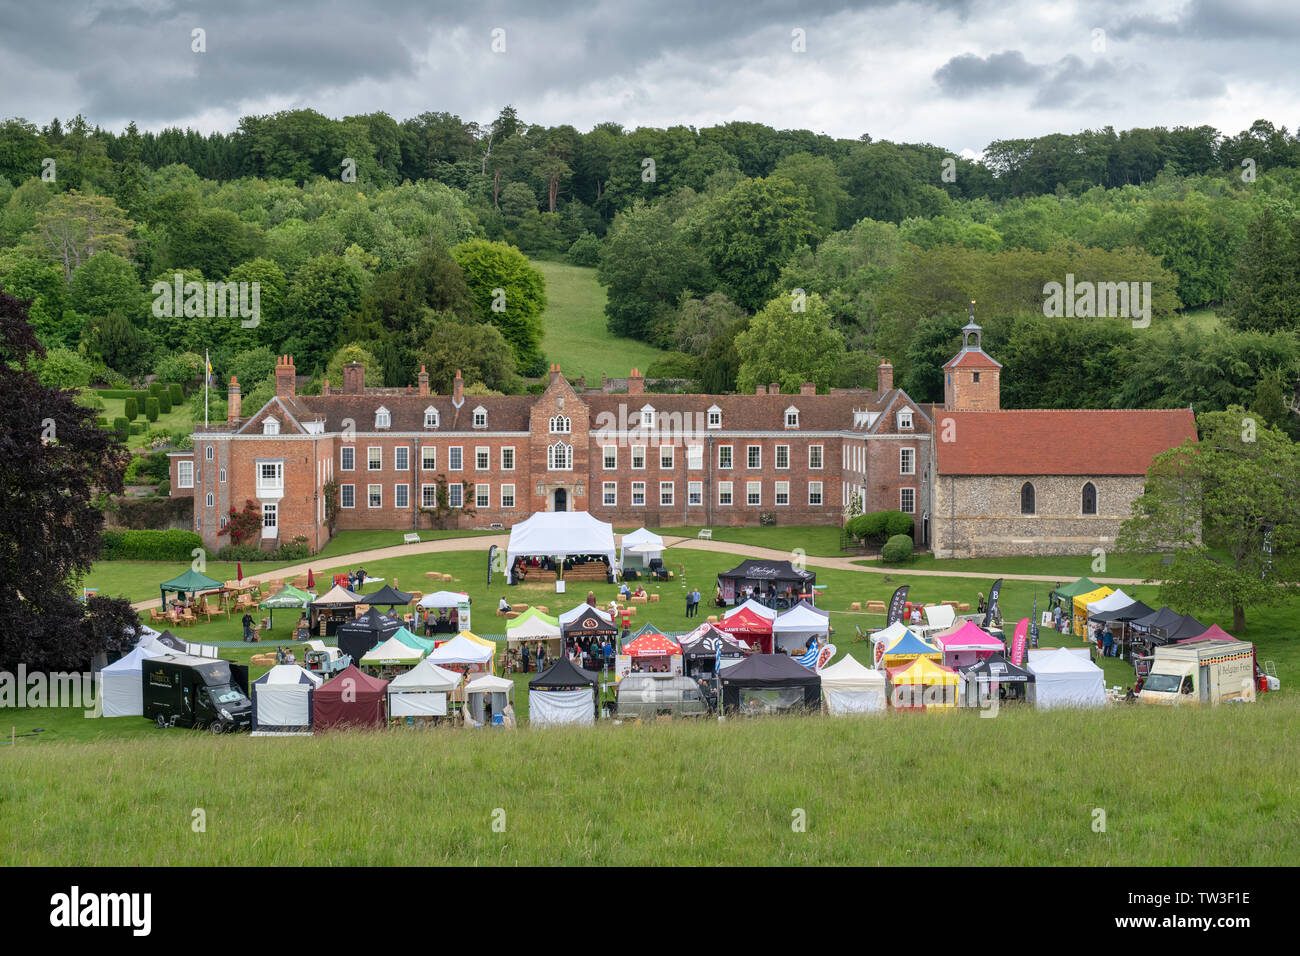 Parco Stonor food festival. Stonor, Henley-on-Thames, Oxfordshire, Inghilterra Foto Stock